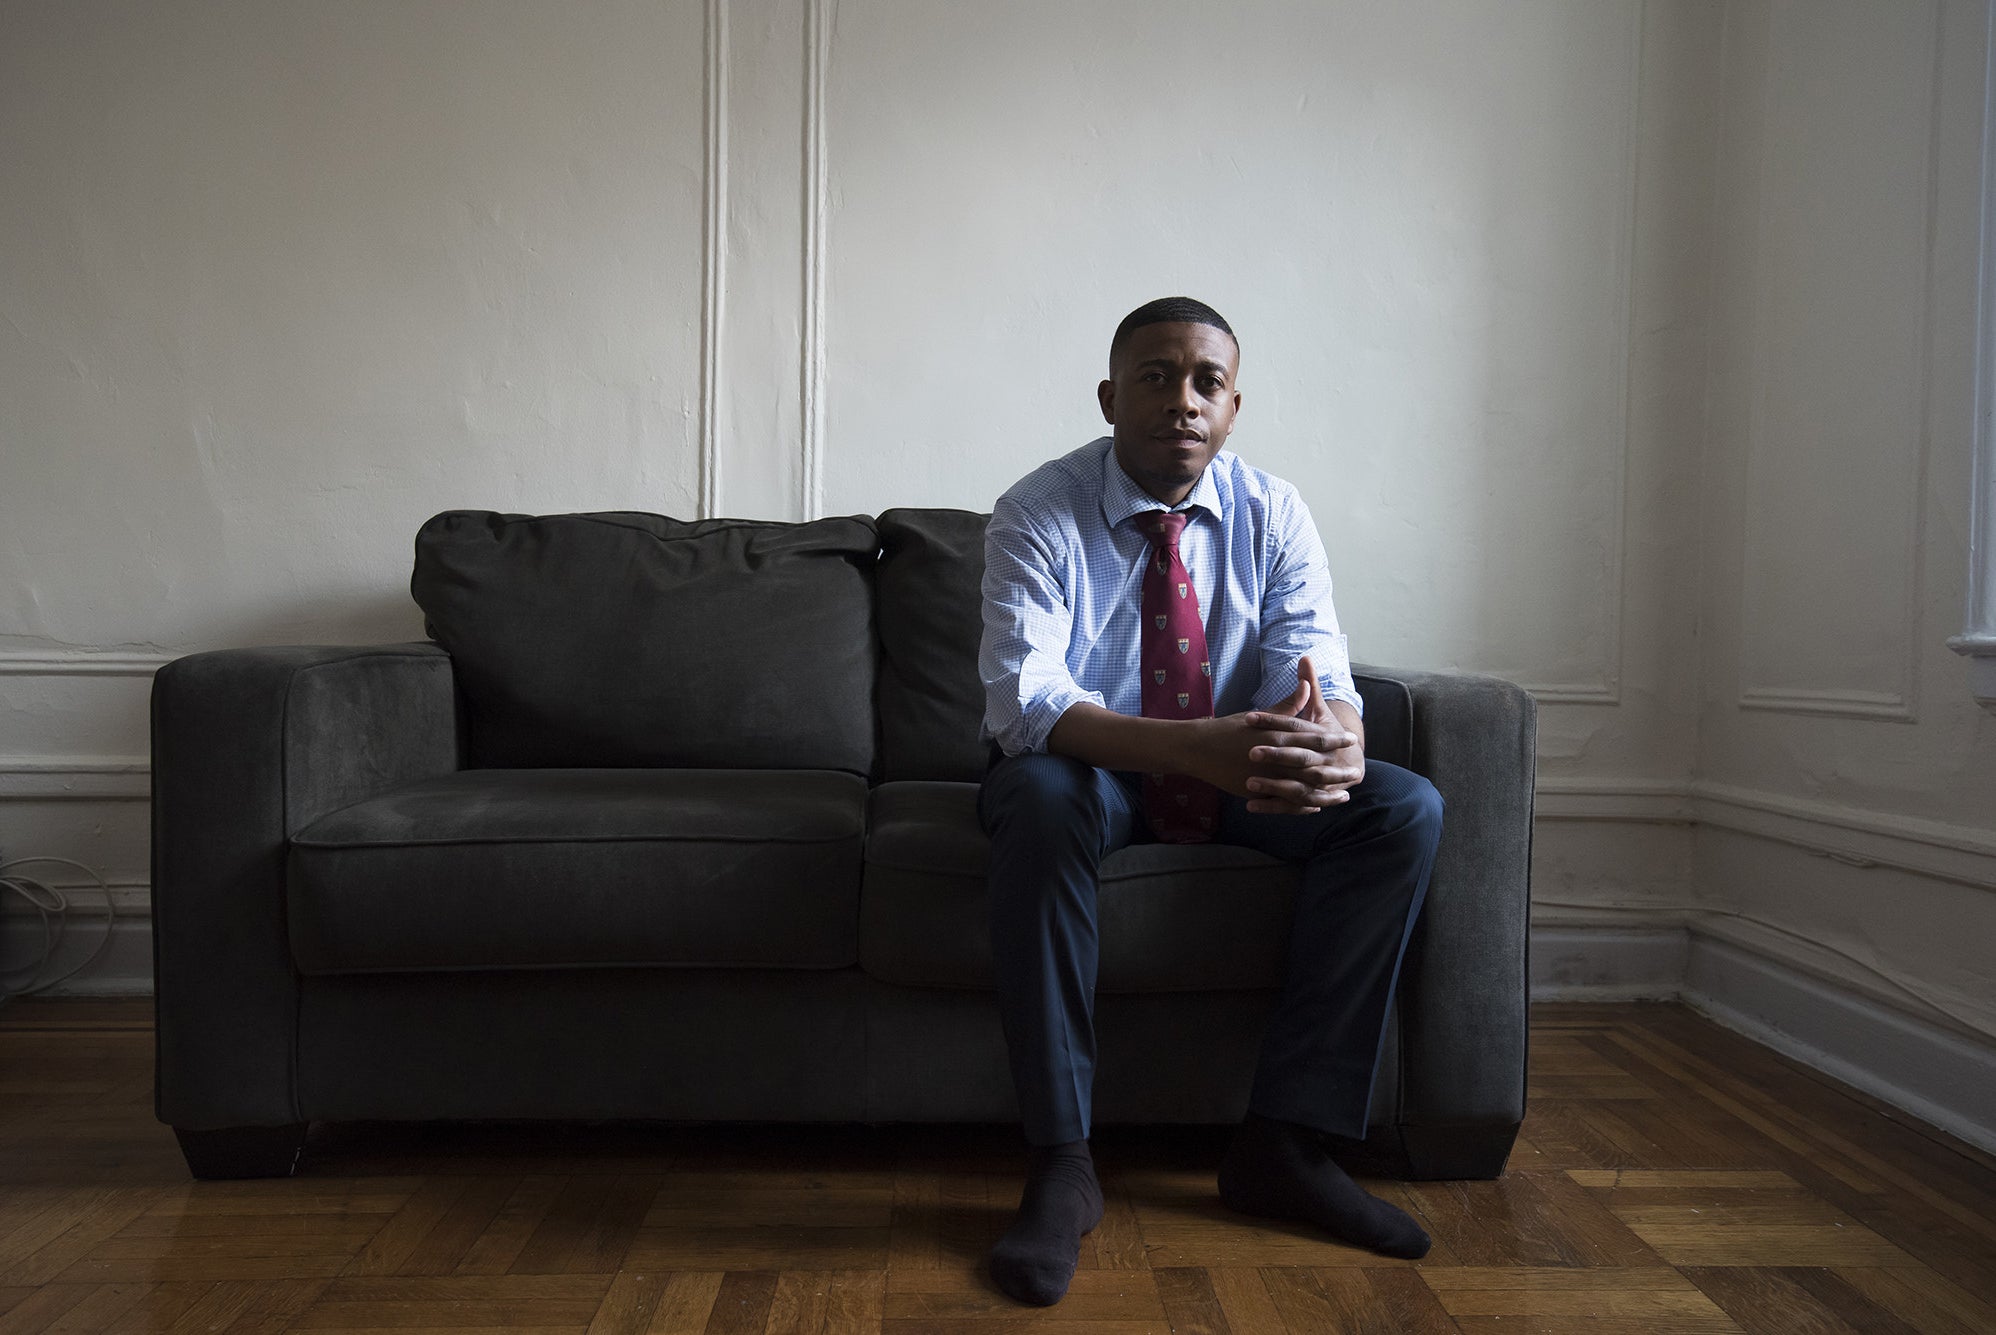 A man in a suit sits on a couch in an apartment